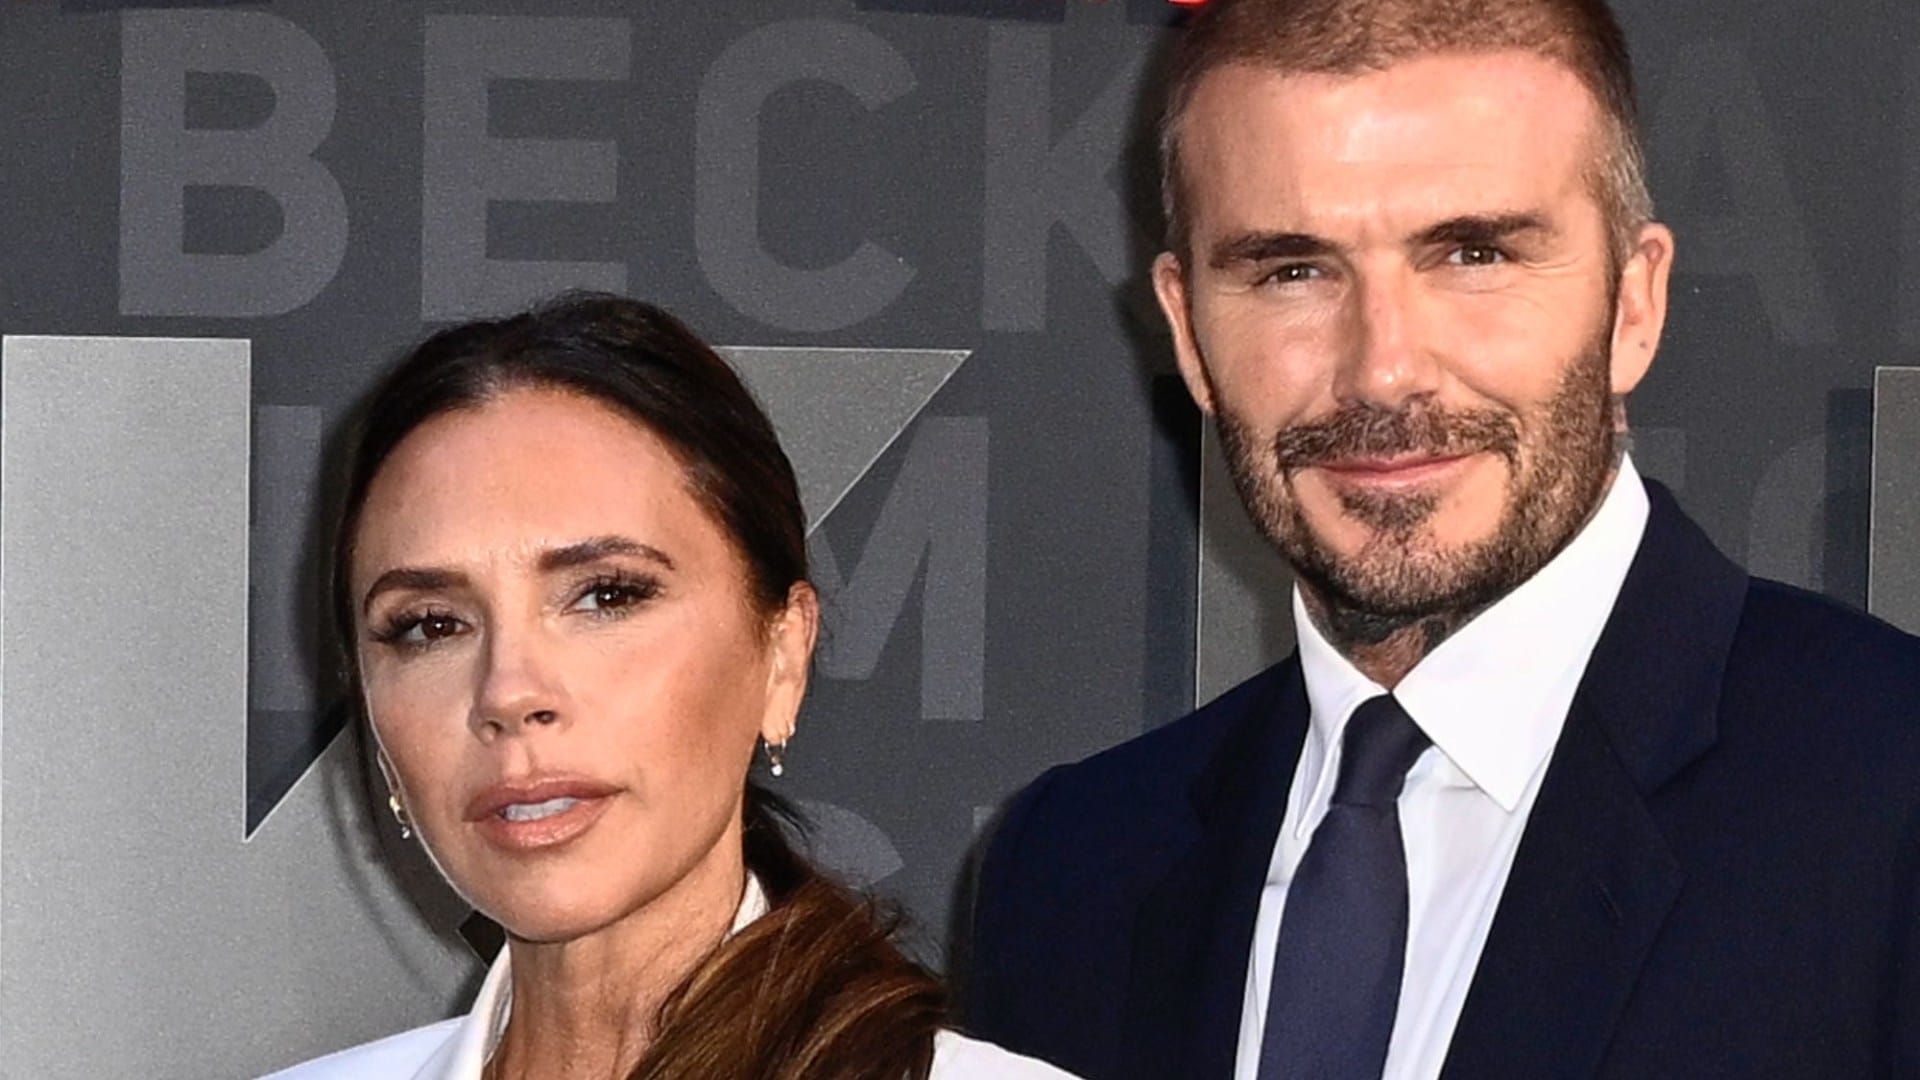 Victoria Beckham breaks silence on 'nightmare' of David's alleged 2003 affair and admits 'I resented him'